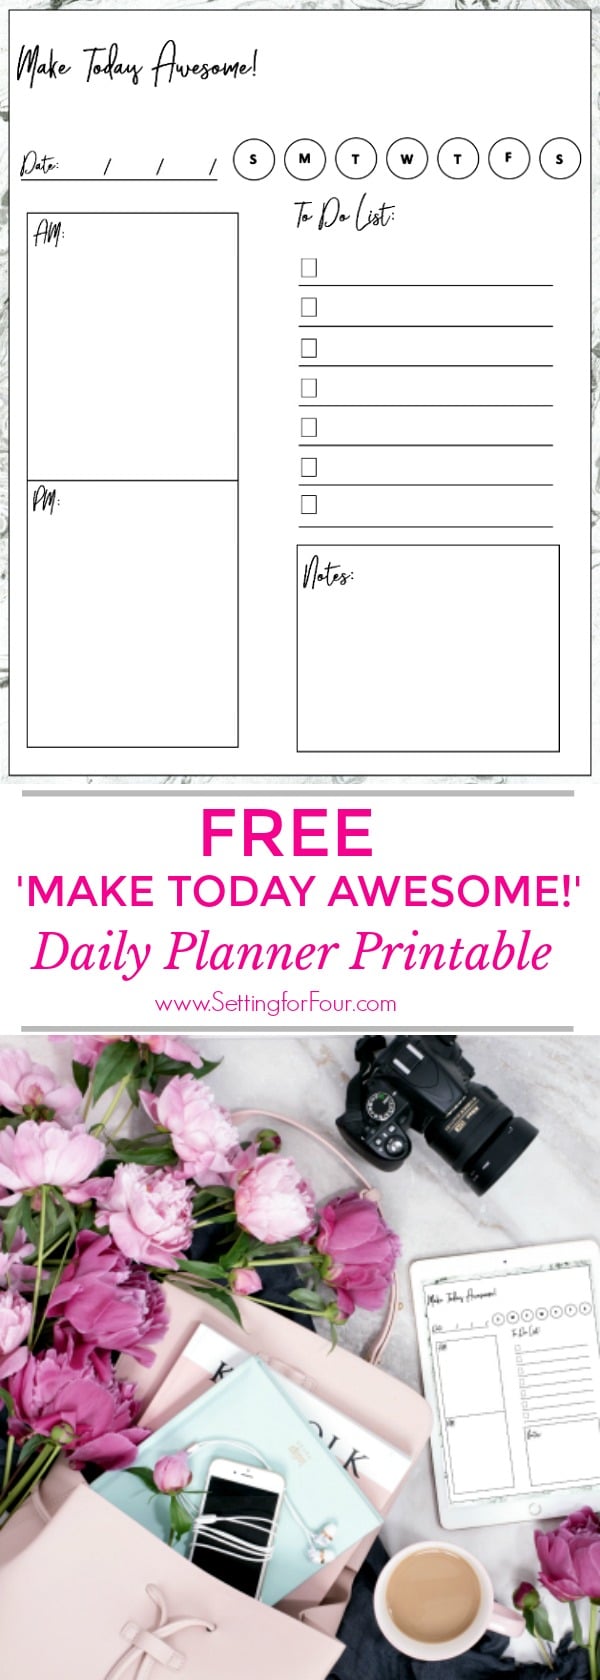 Get your  'MAKE TODAY AWESOME!' FREE DAILY PLANNER PRINTABLE to organize and plan each day of the year!! Simple and straightforward, this one-page printable daily planner page makes it easy and fun to plan out your day! This daily planner is for adults, teens and kids! 